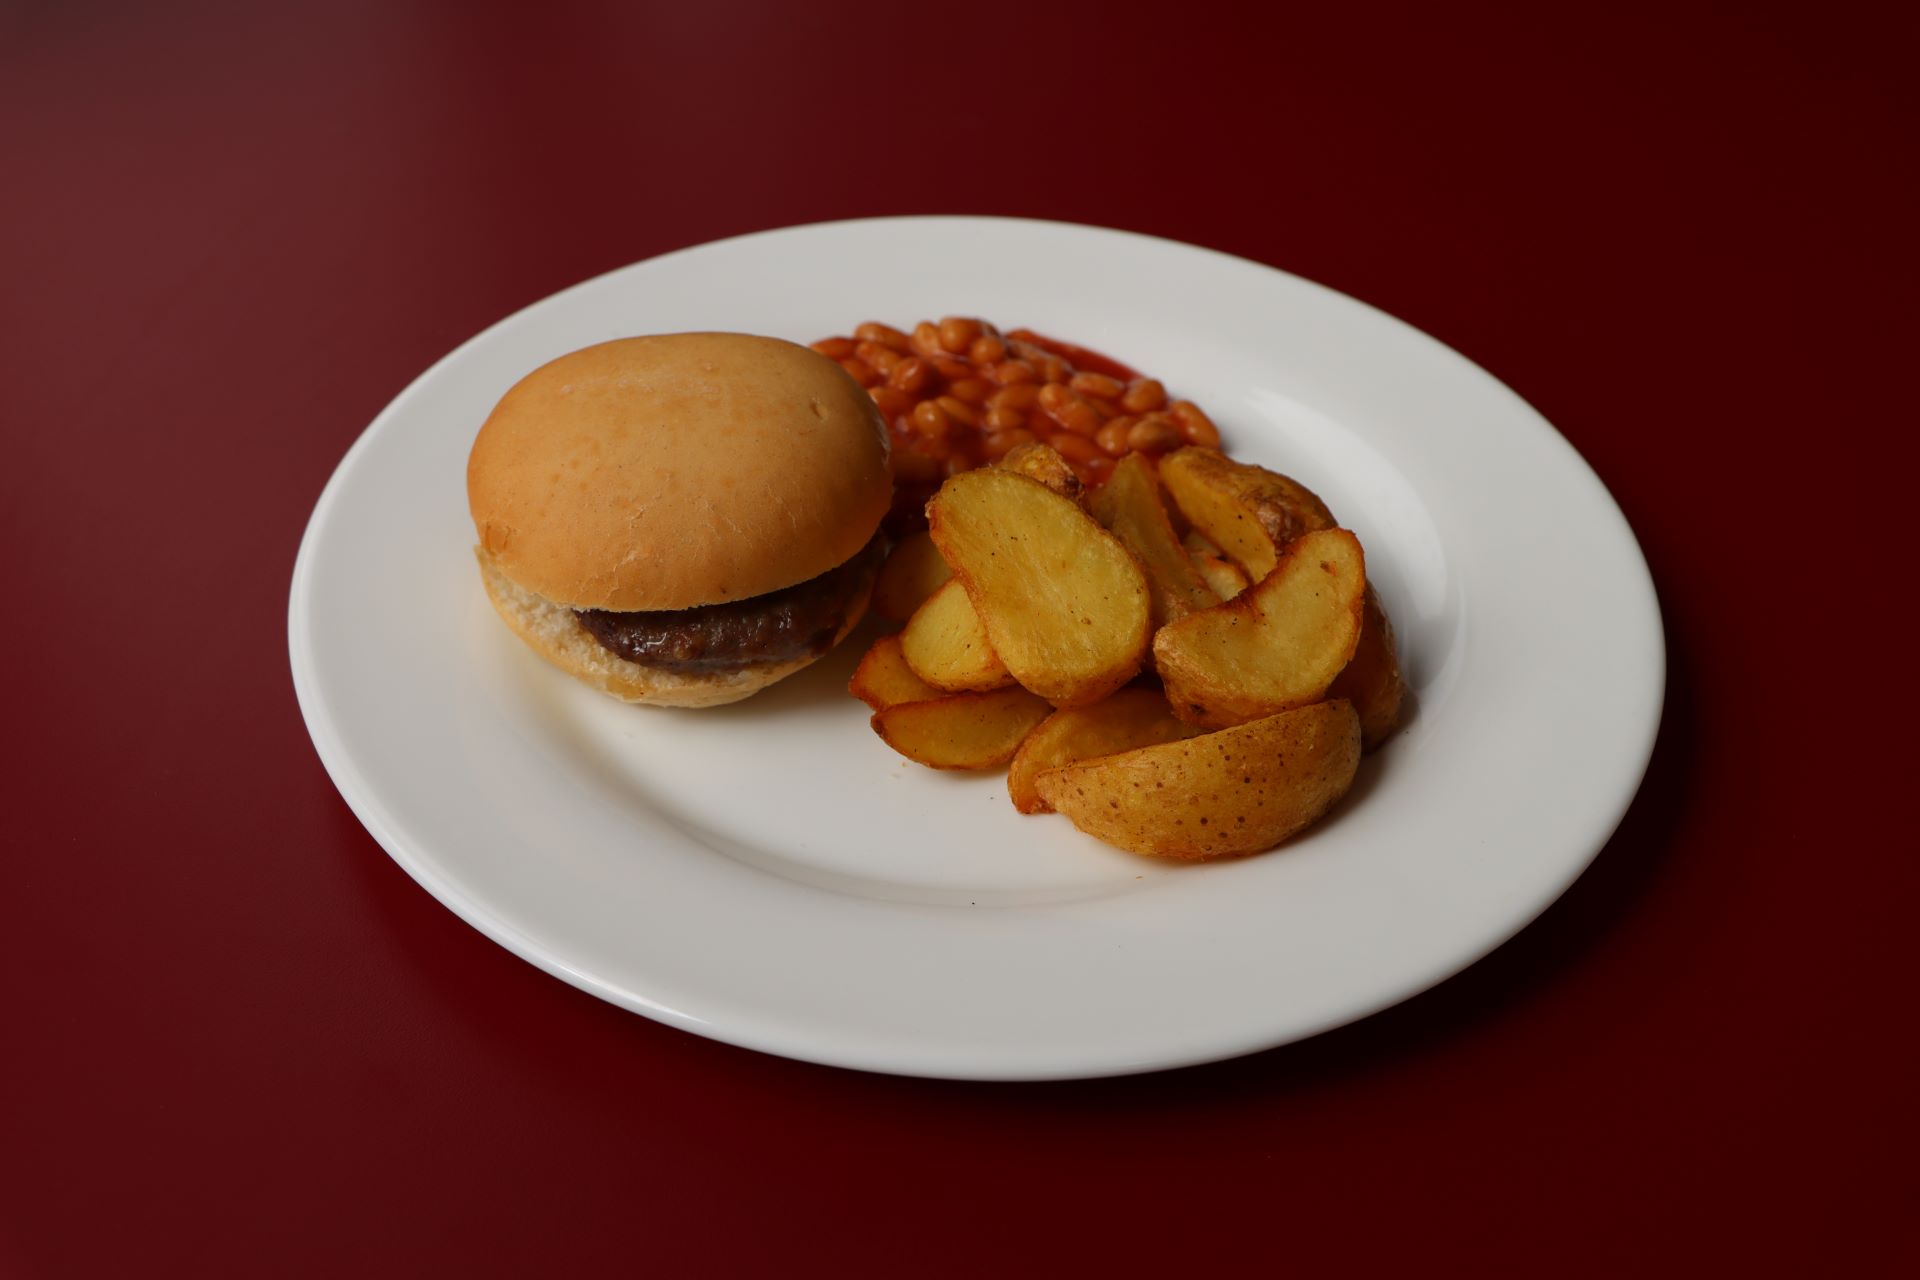 Dartmoor Beef Burger with Jacket Wedges and Baked Beans